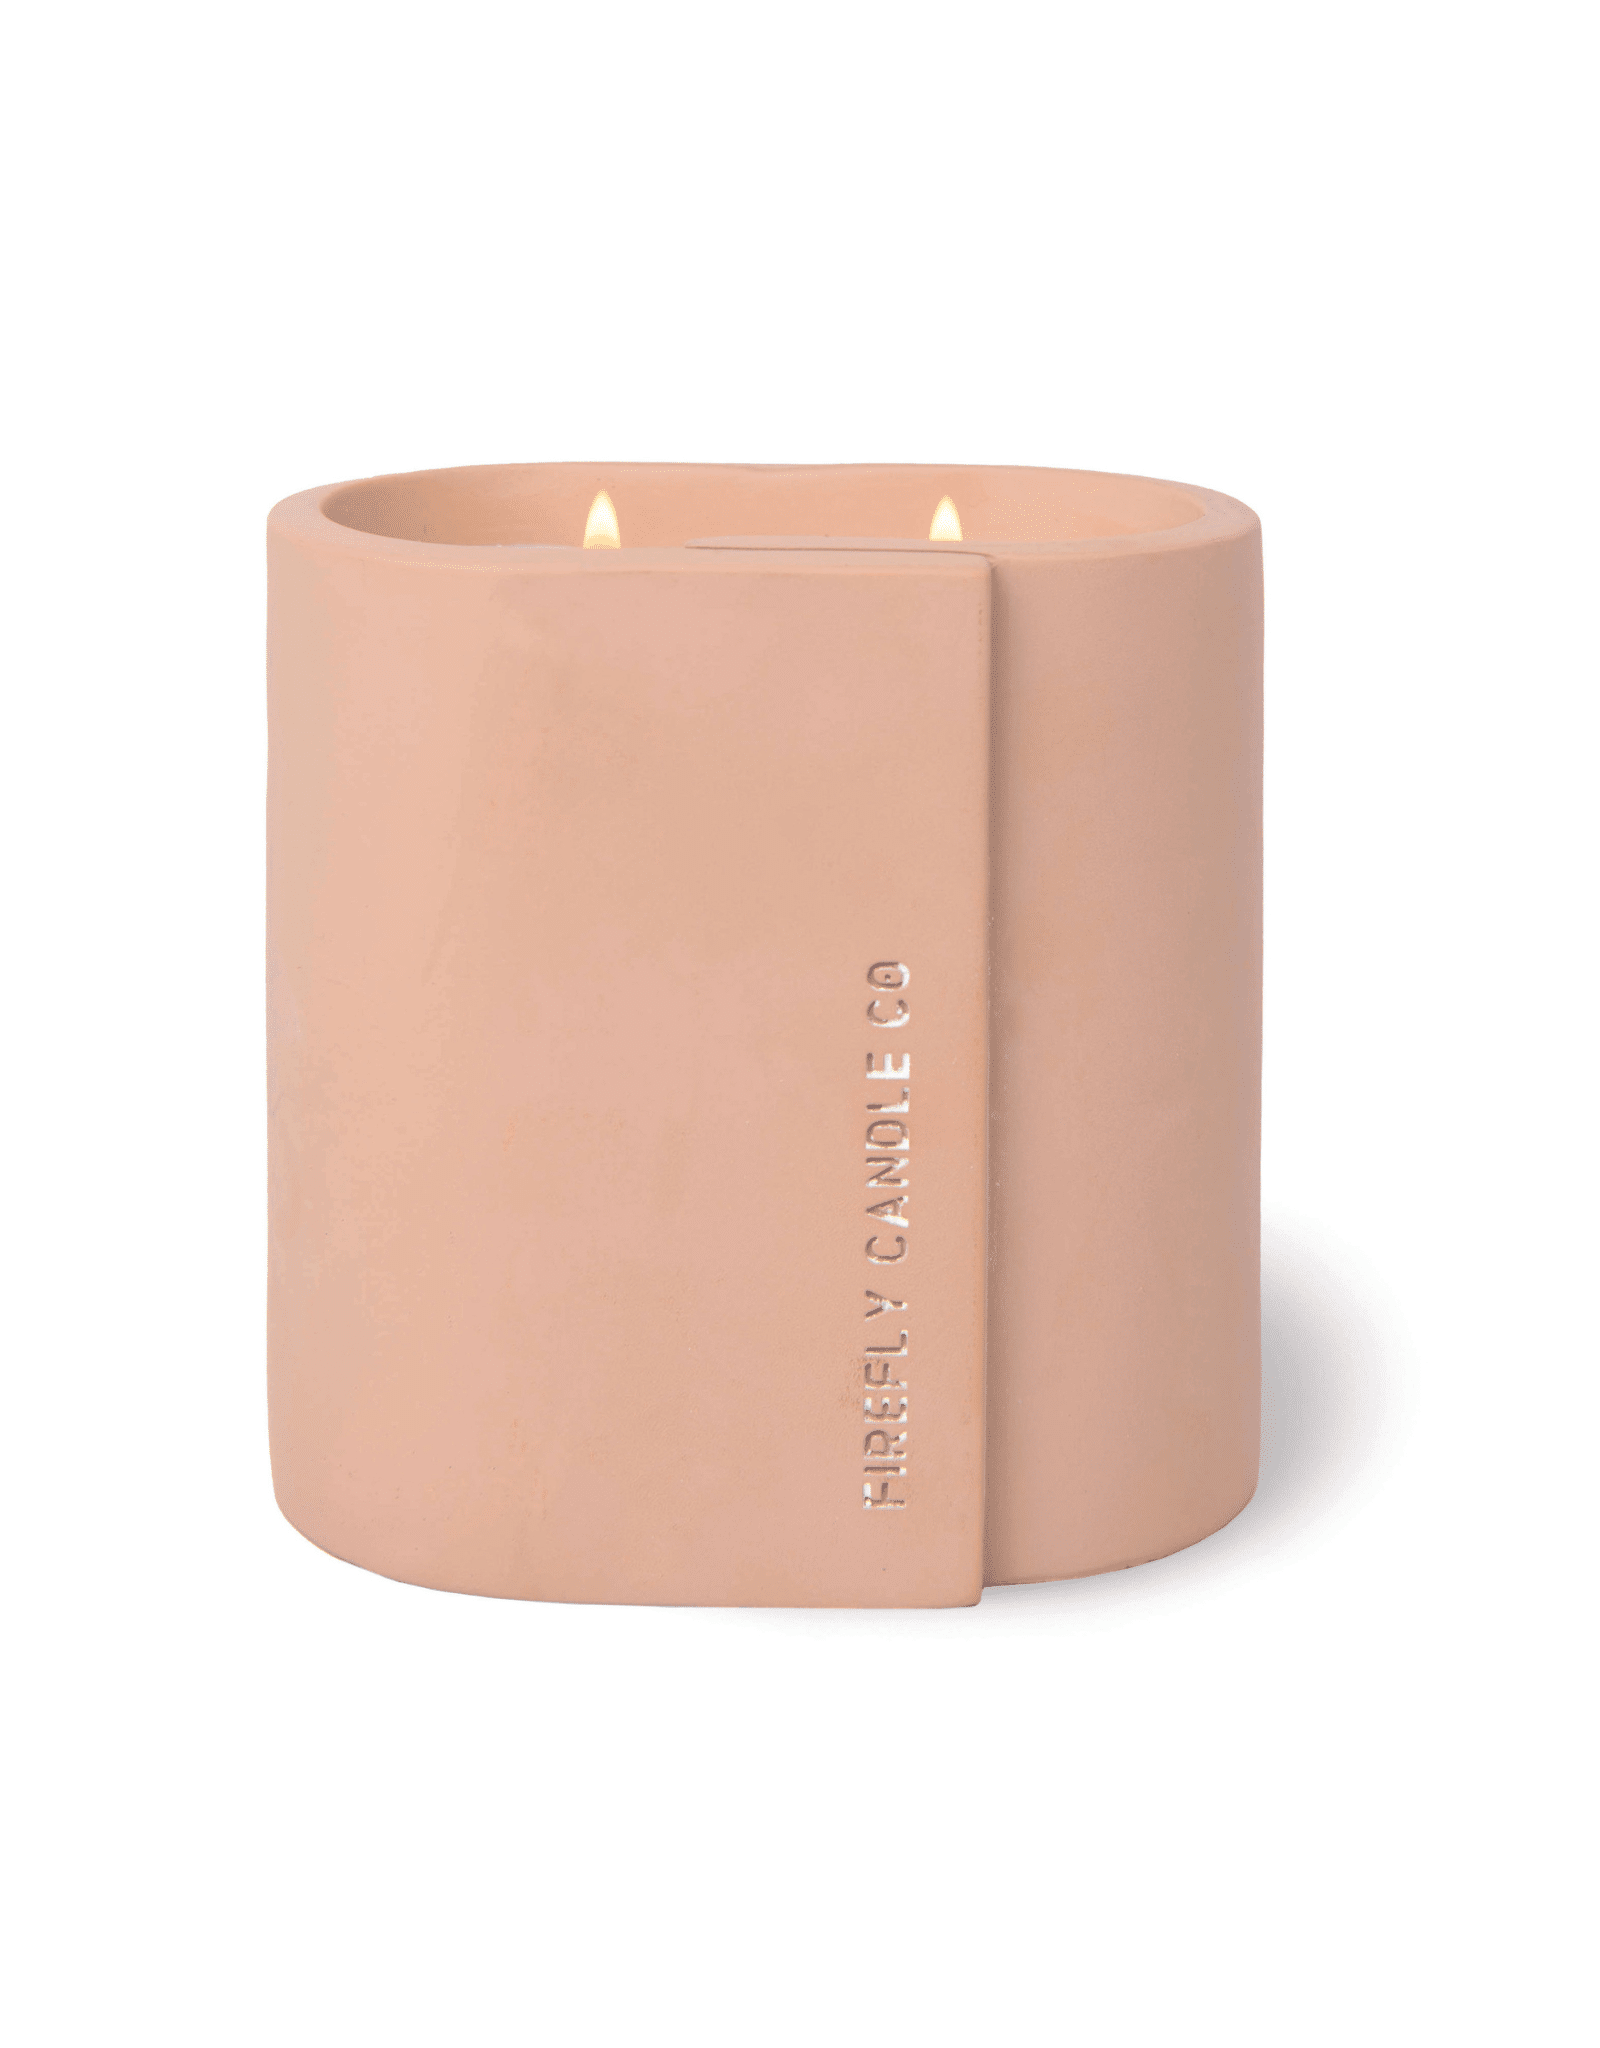 Firefly Candle Co. Firefly Cirque Candle (12oz)